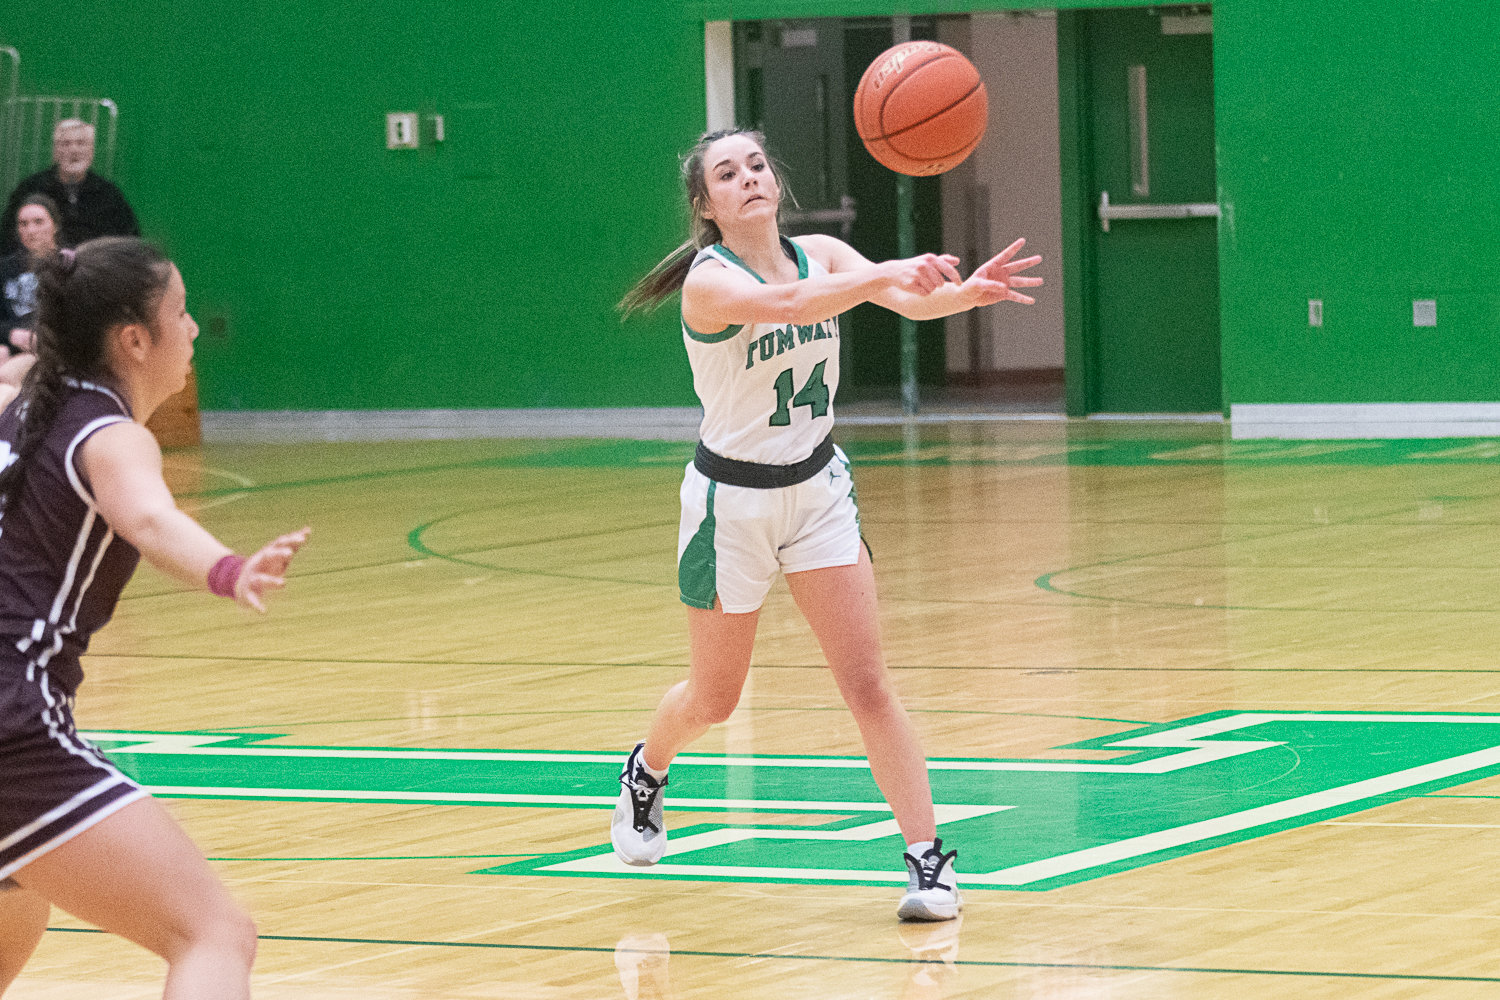 Hadley Woods fires a pass along the perimeter during the second half of Tumwater's 37-21 loss to Montesano on Dec. 22.